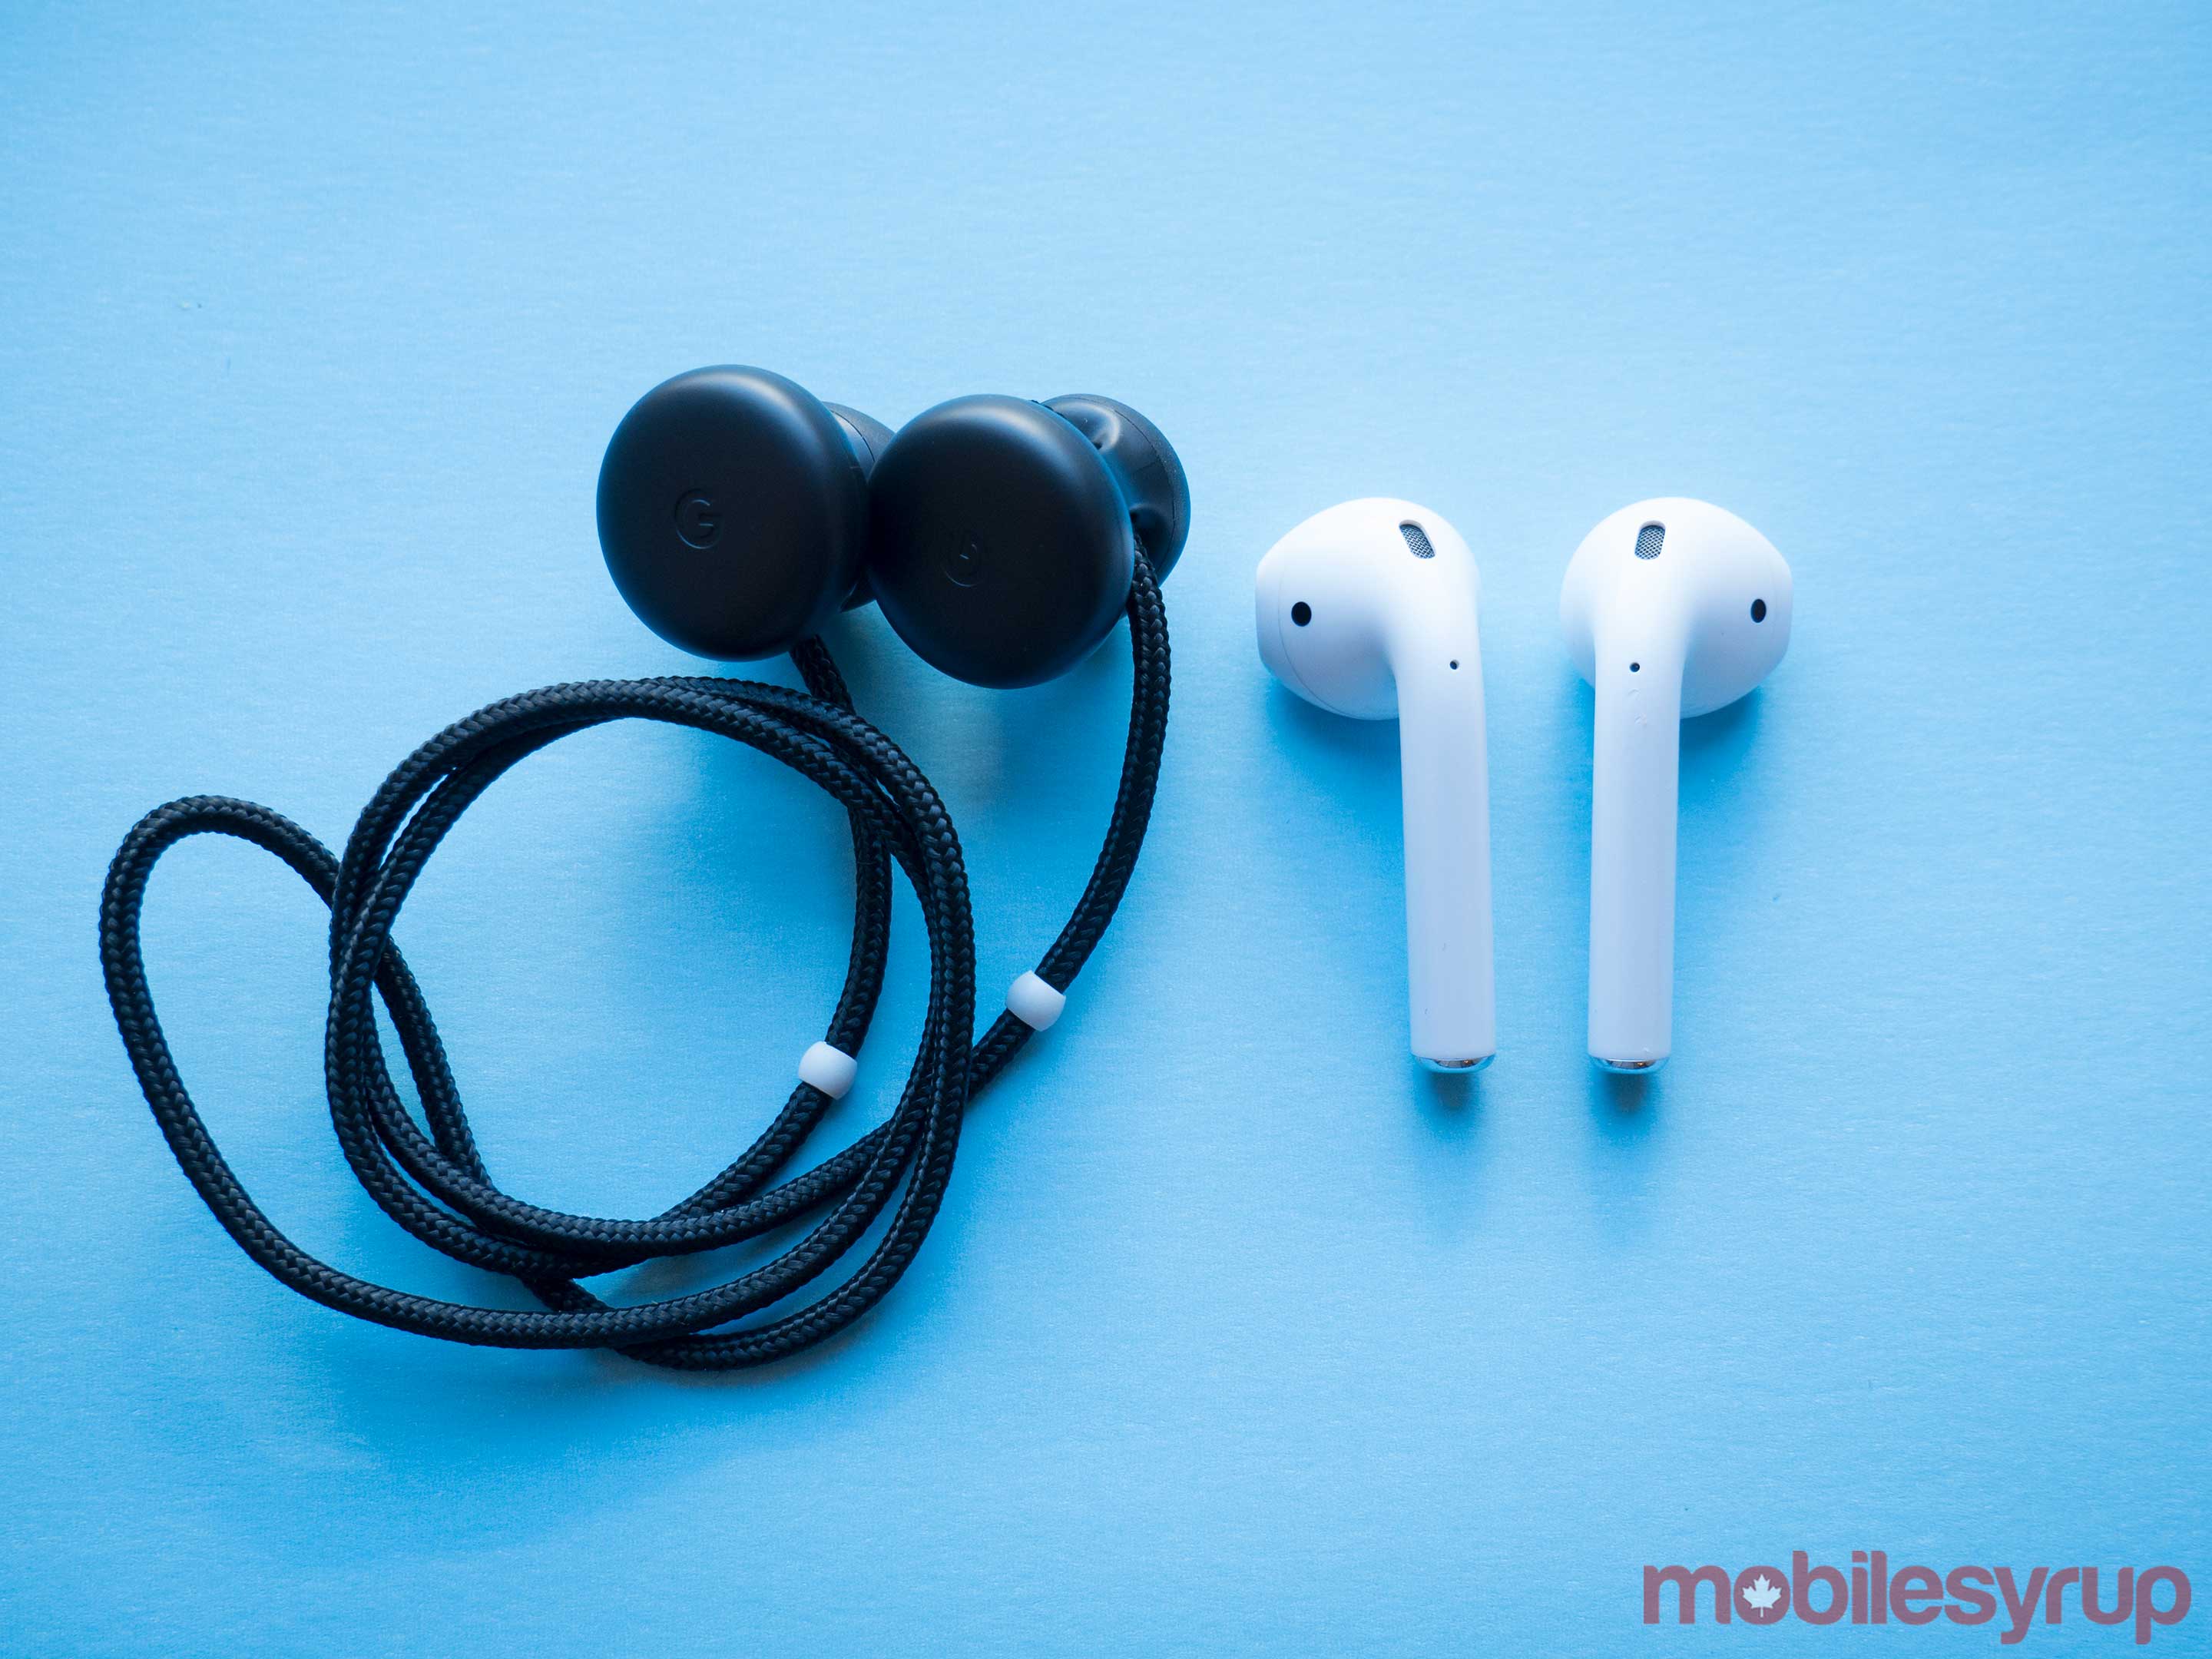 Pixel Buds and Apple's AirPods